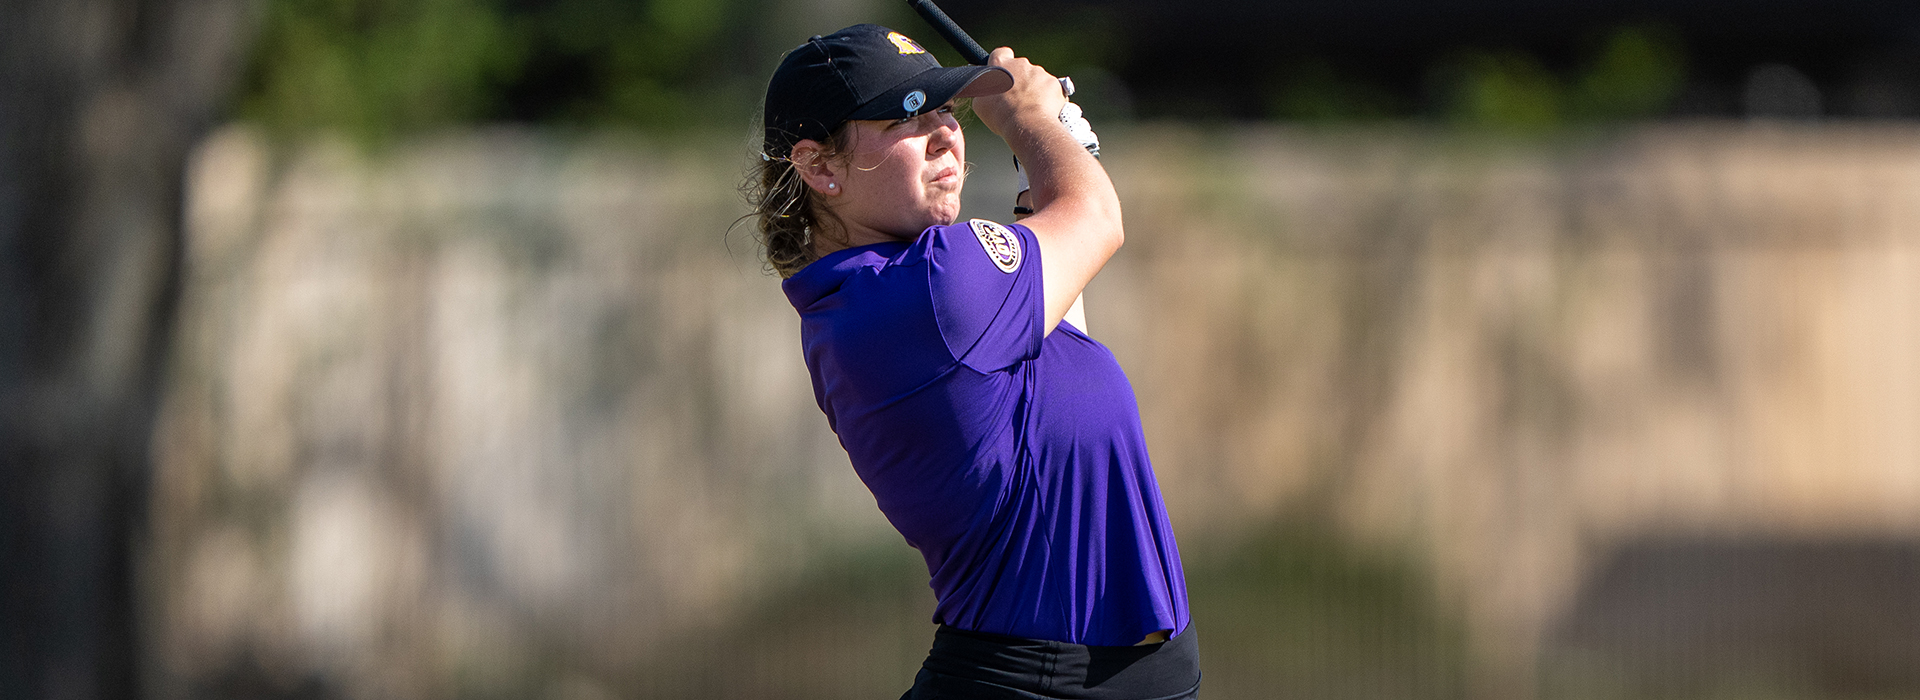 Purple and gold end regular season with seventh-place finish at Brickyard Collegiate